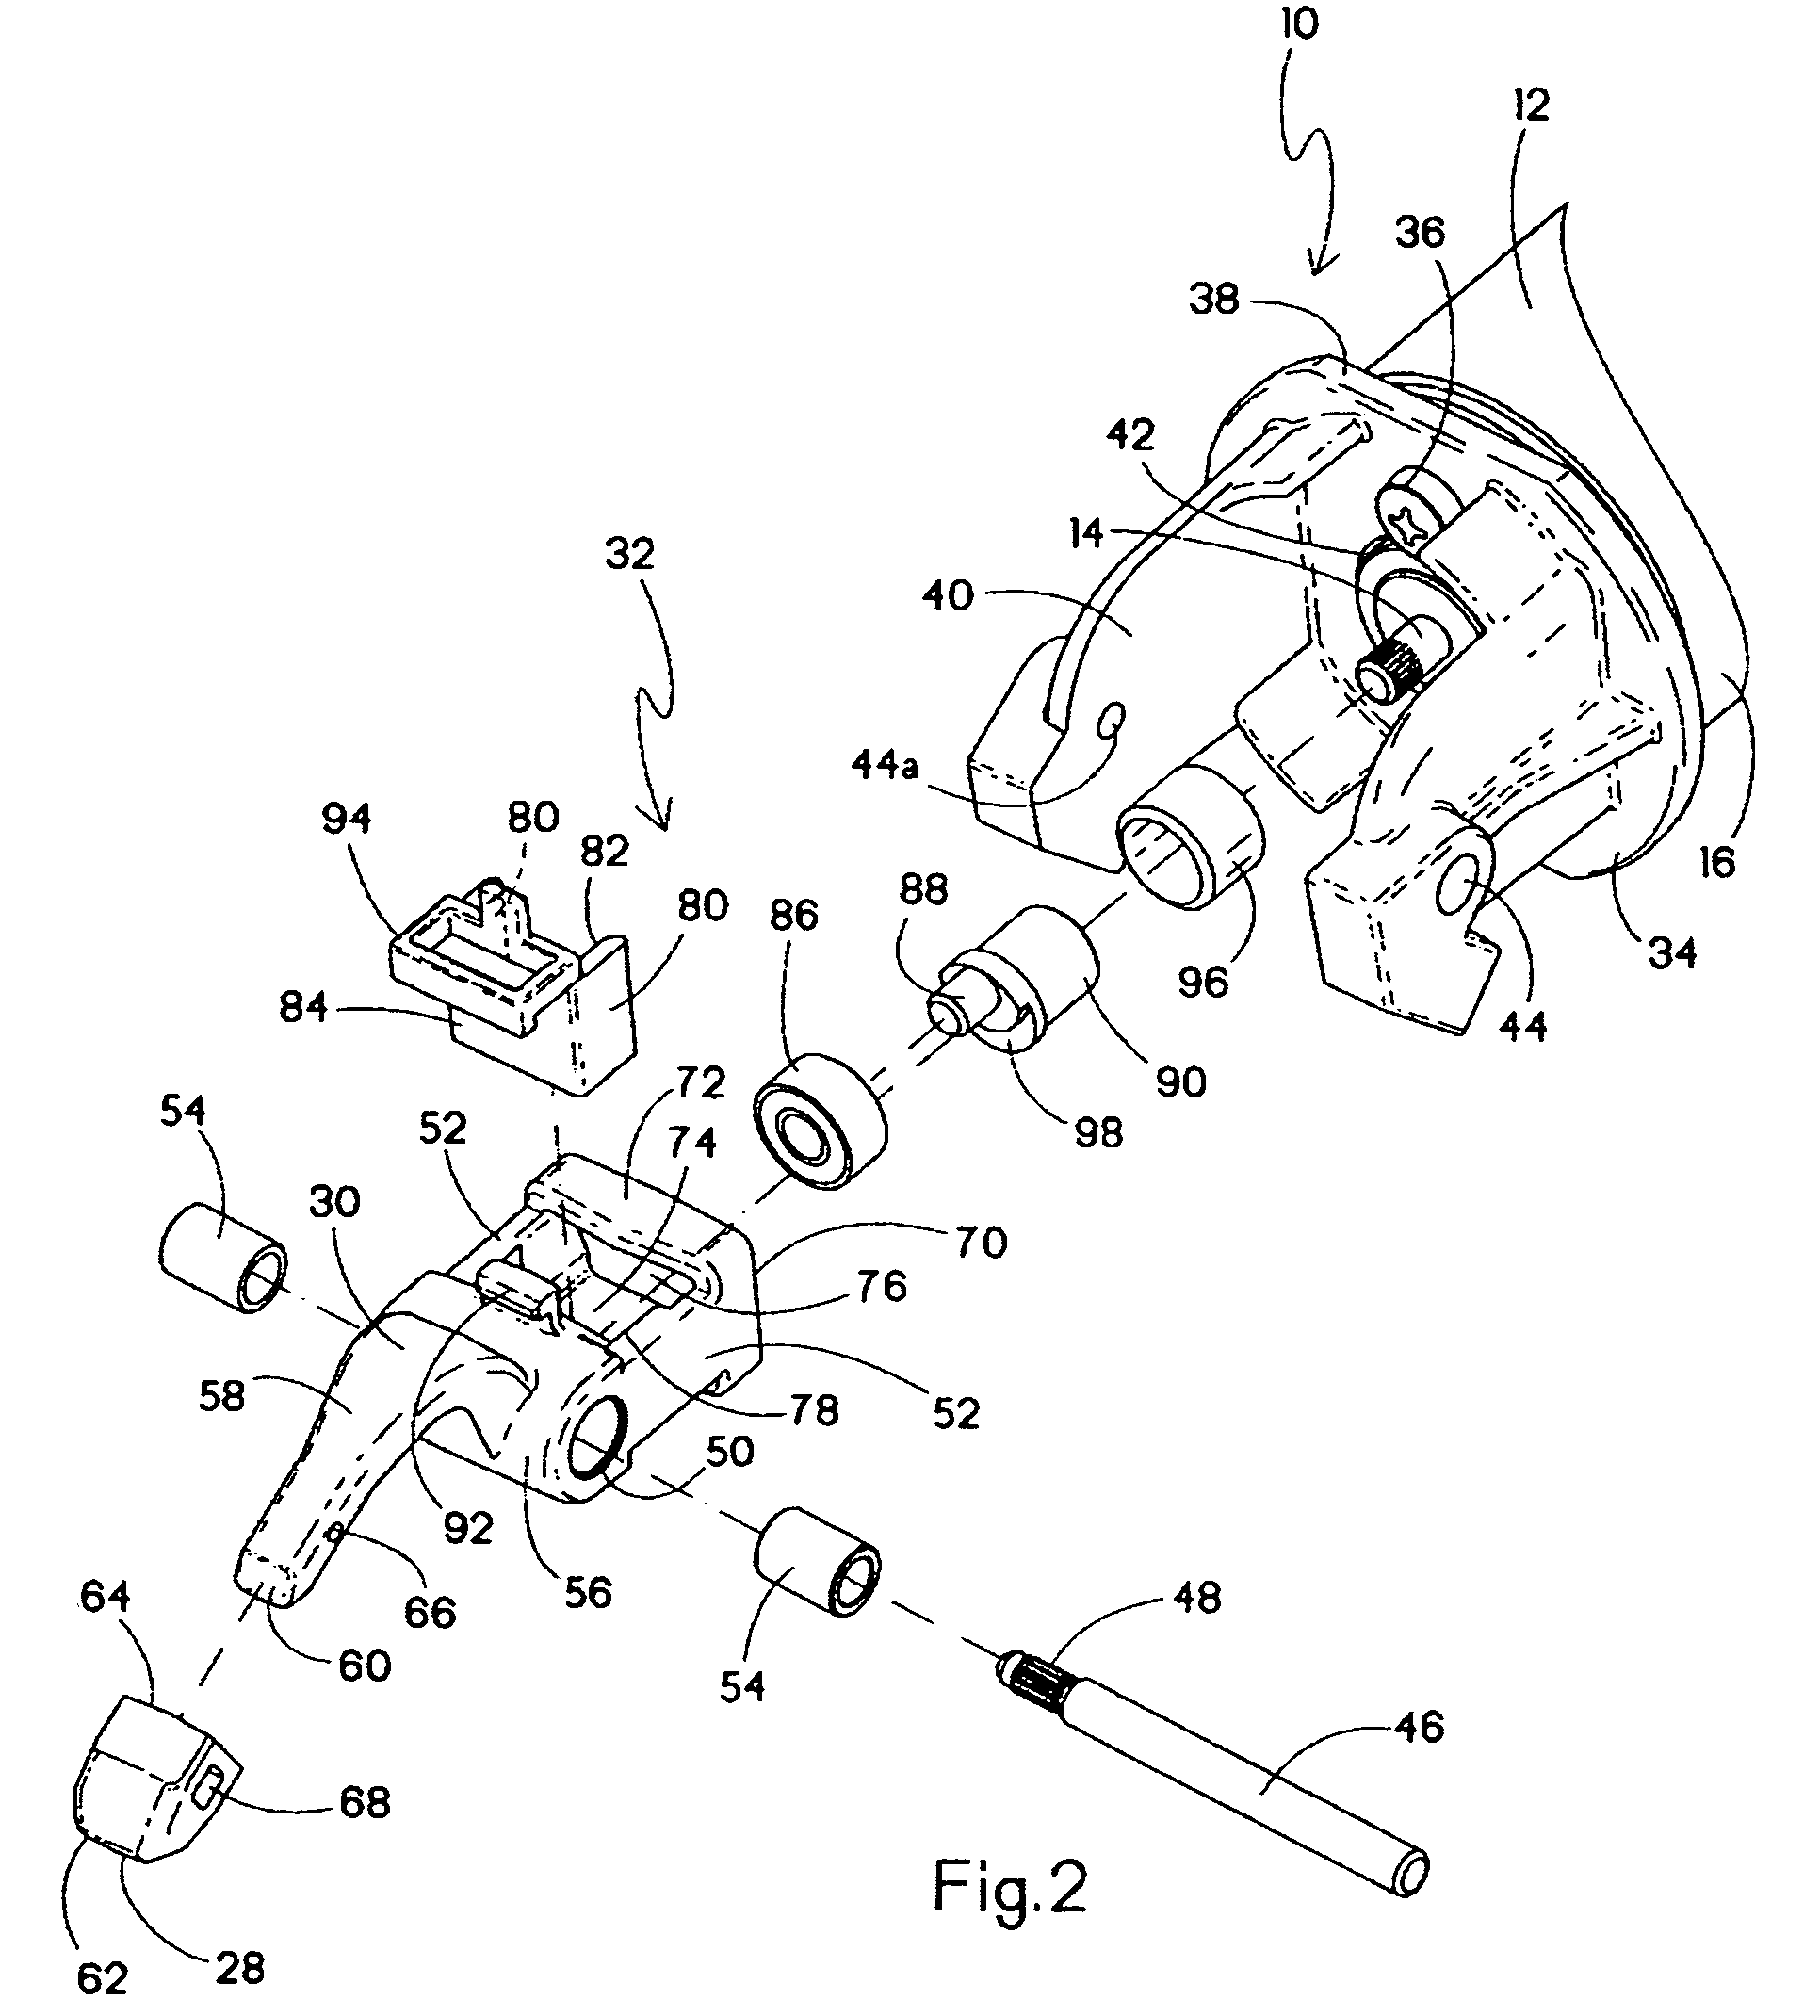 Rotary motor clipper with linear drive system